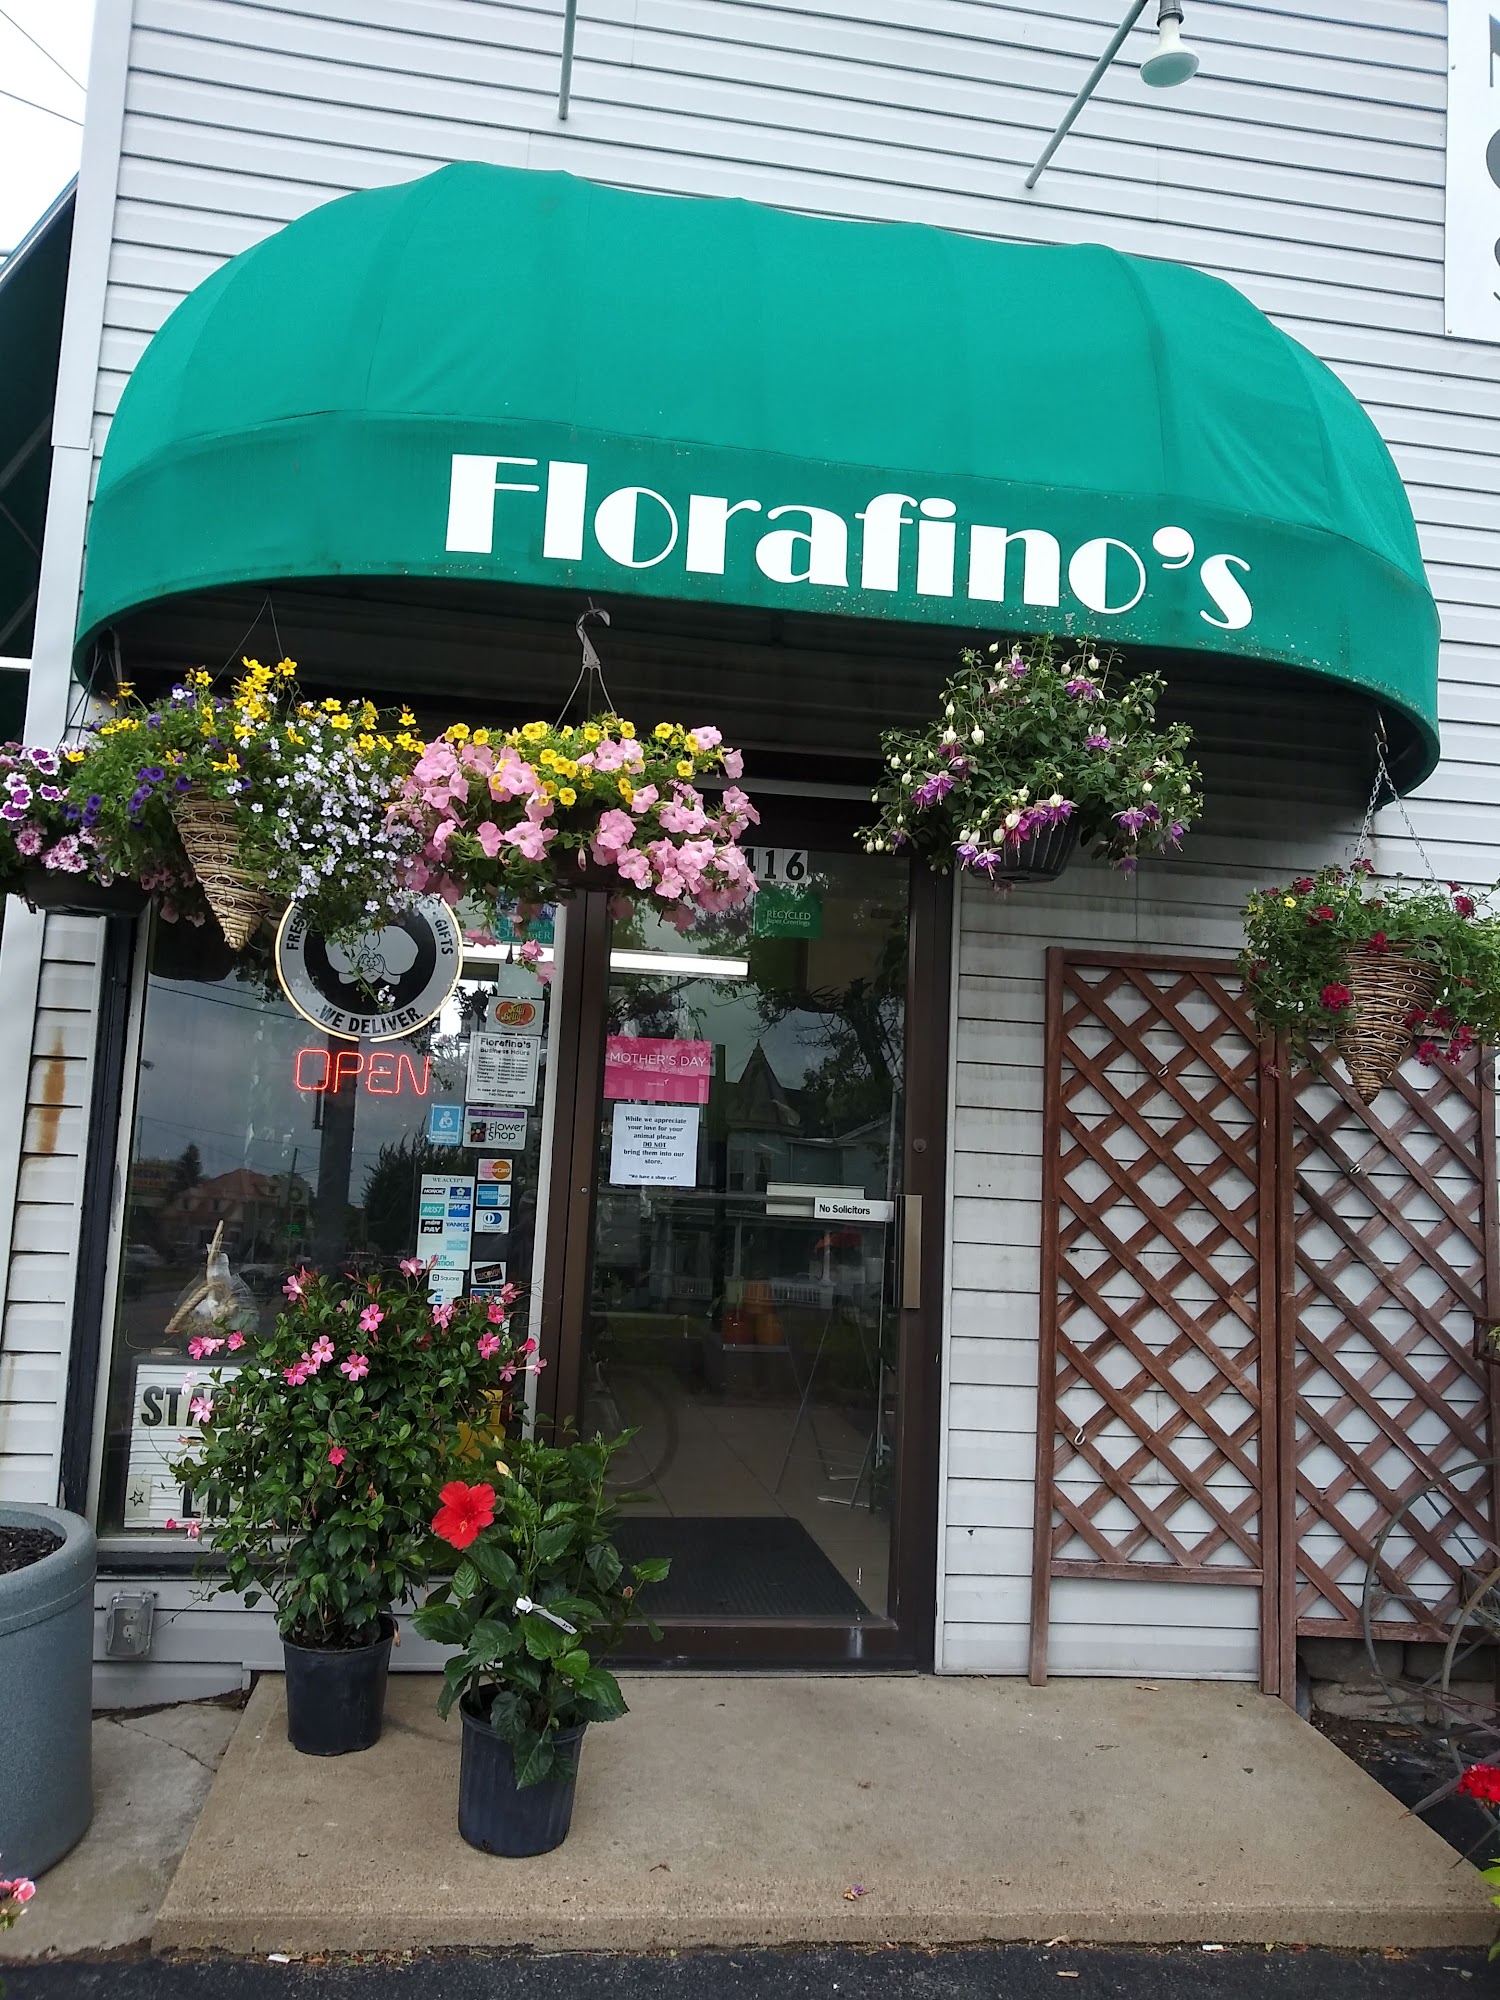 Florafino's Flowers & Gifts